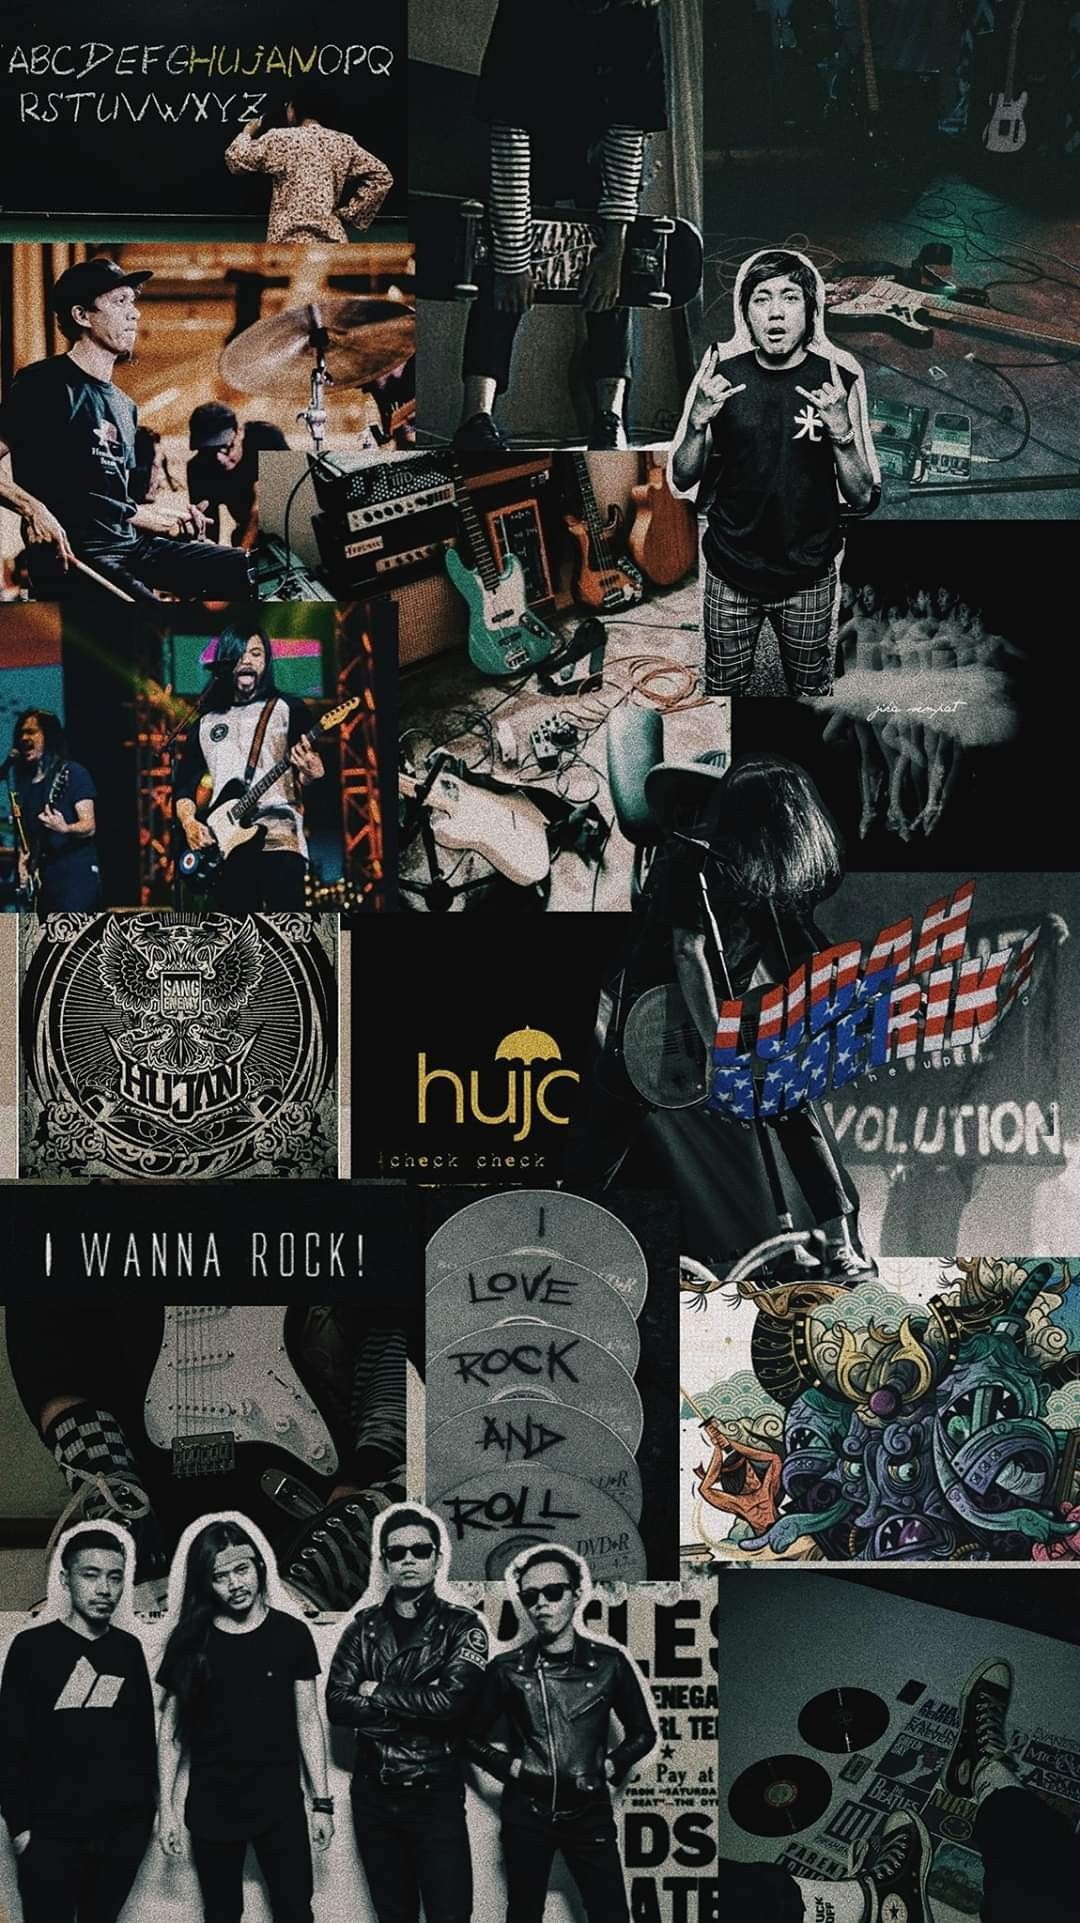 A collage of my favorite band, My Chemical Romance - Rock, punk